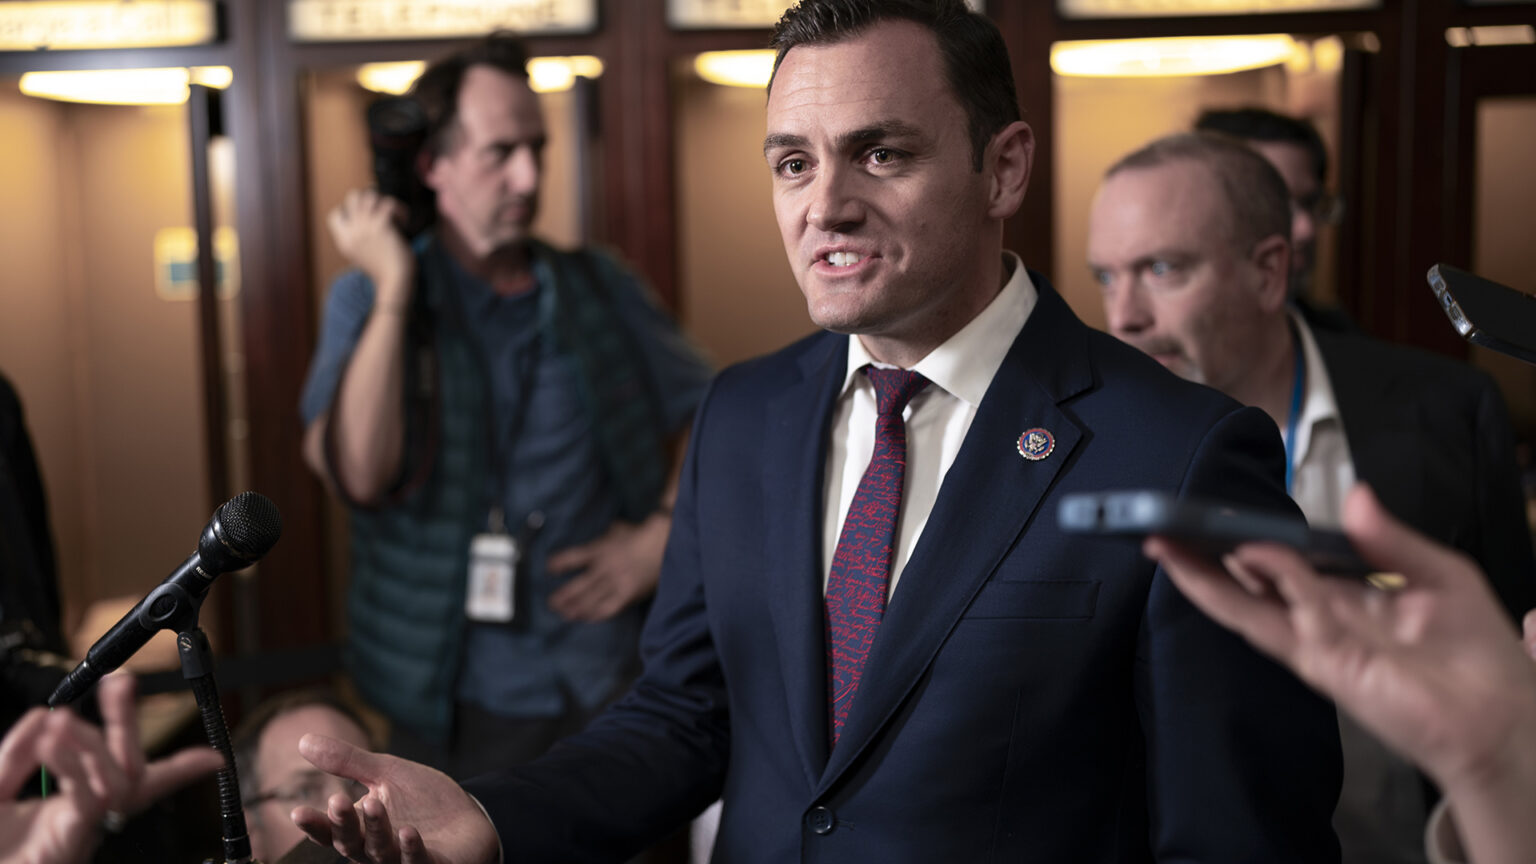 Mike Gallagher speaks while gesturing with his right hand, surrounded by reporters, including two holding cell phones to record the audio.